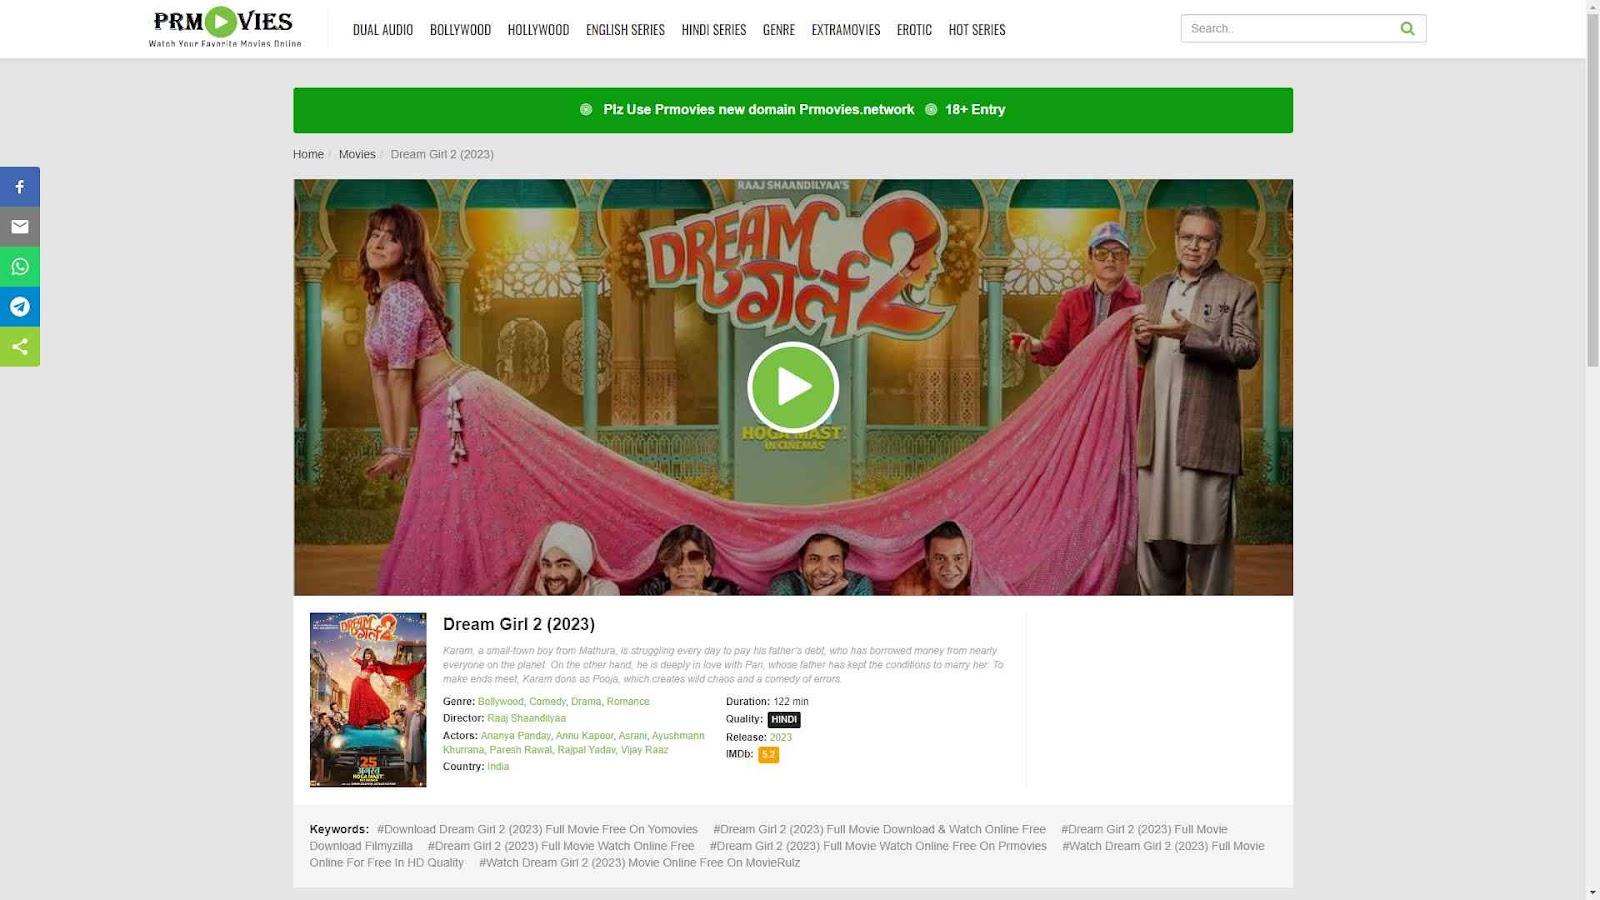 How to Download Movies from PRMovies